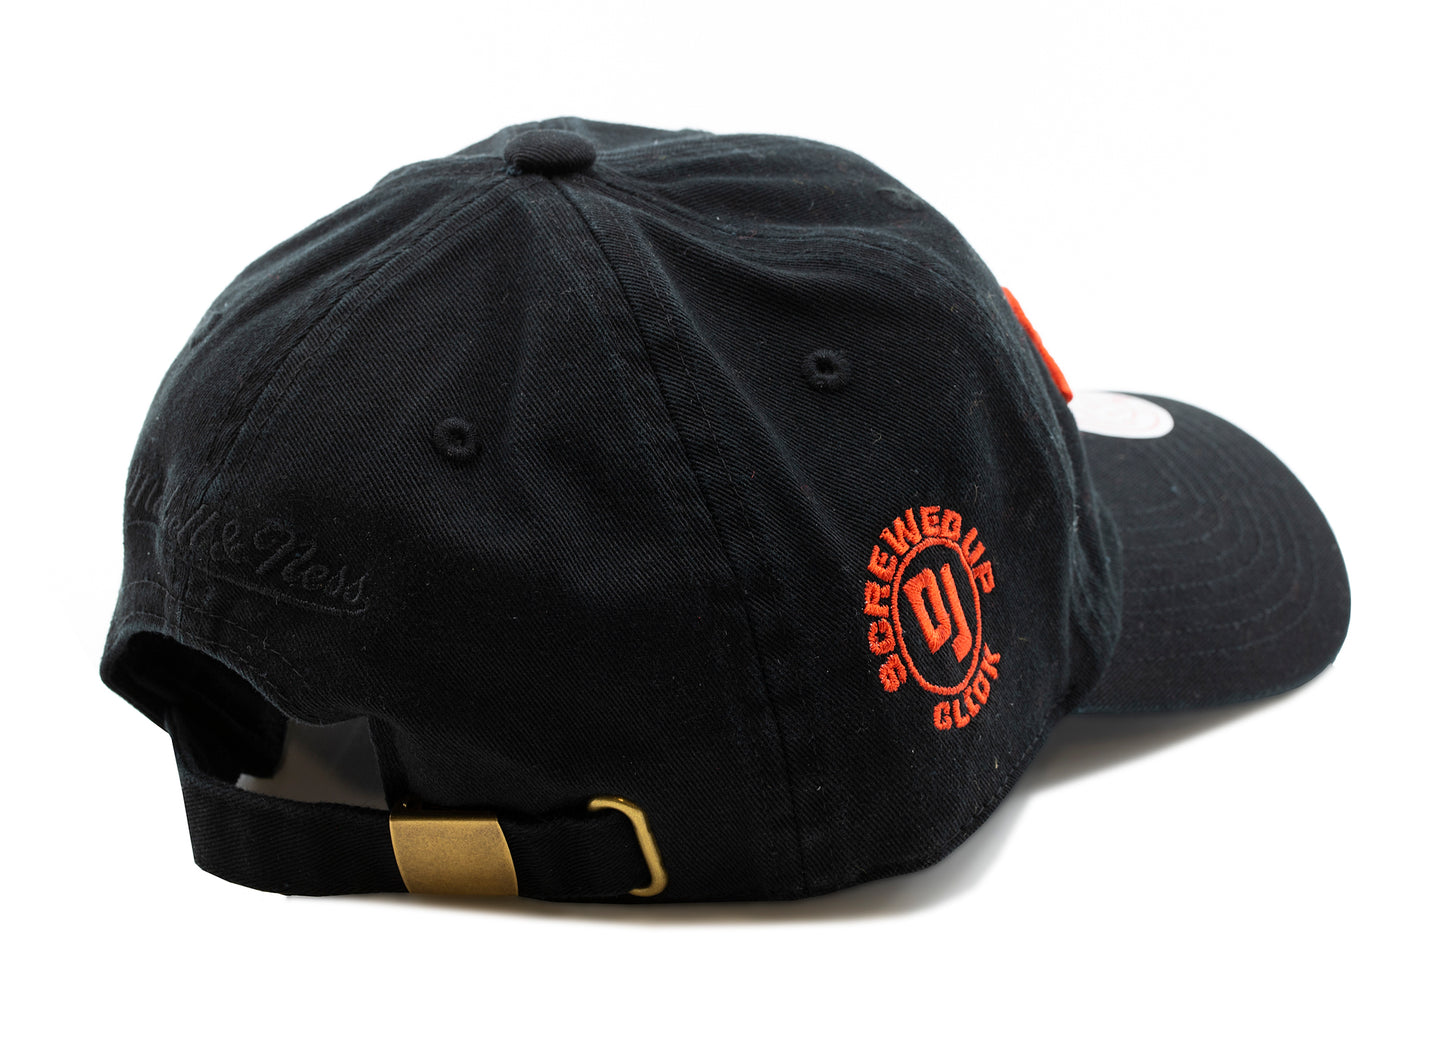 Mitchell & Ness Screwed Up Collaboration Hat